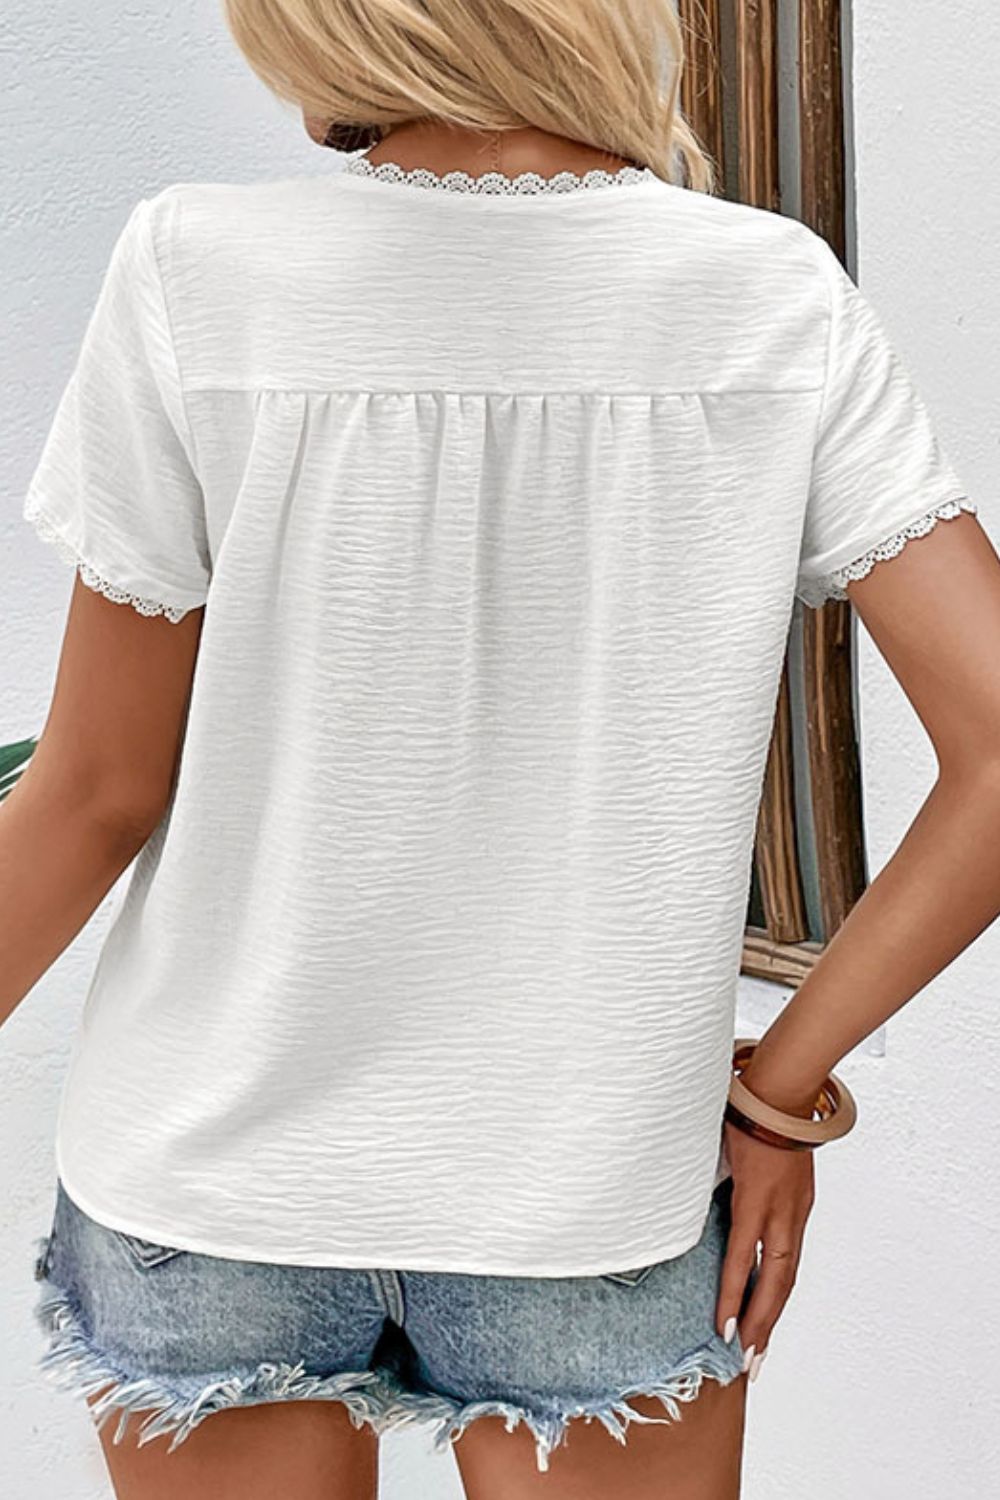 Textured Lace Trim Tee Shirt Print on any thing USA/STOD clothes